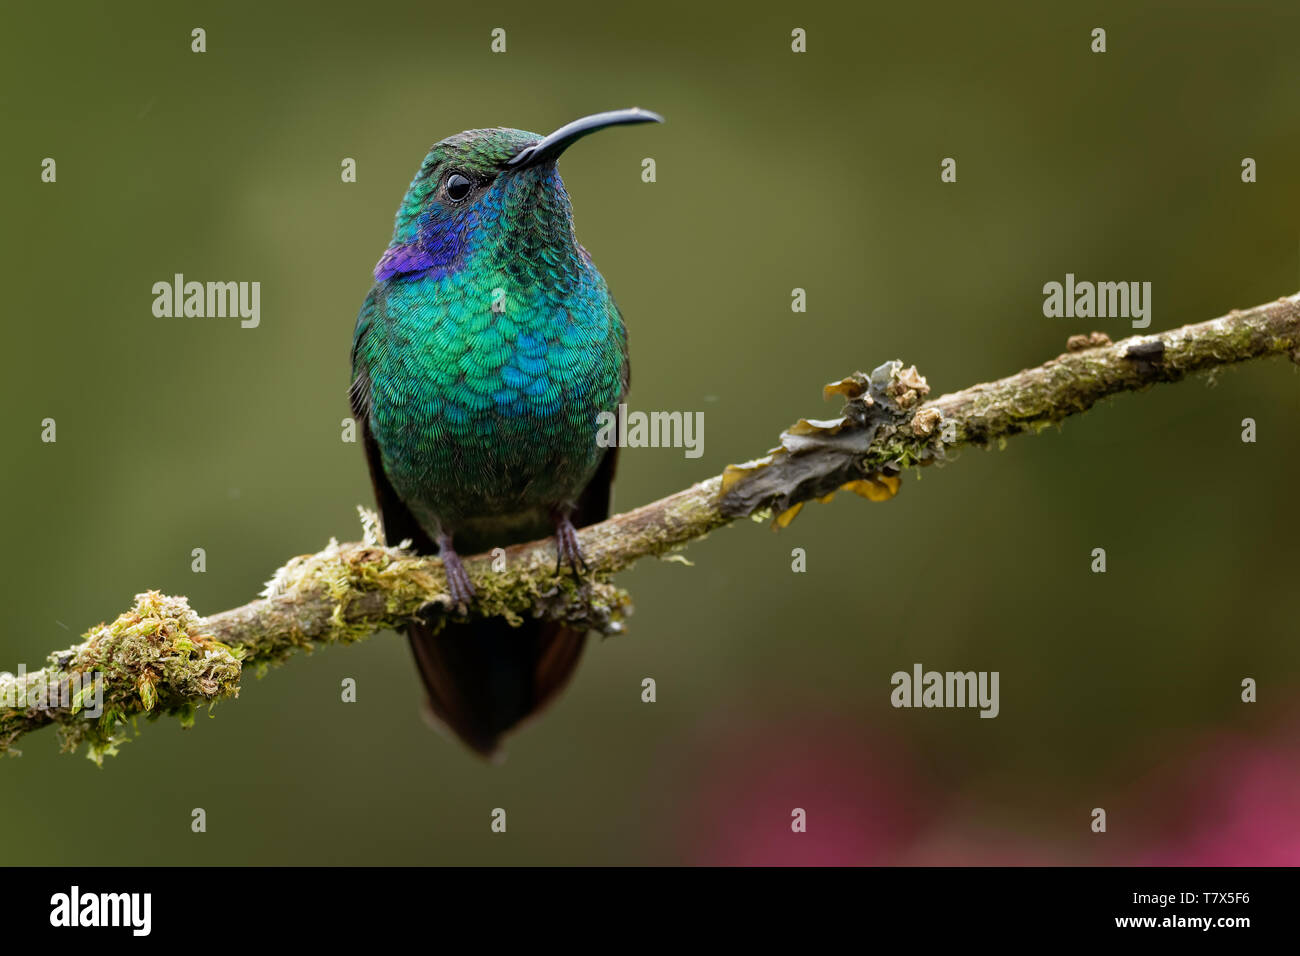 Green (Mexican) Violet-ear - Colibri thalassinus medium-sized, metallic green hummingbird species found in areas from Mexico to Nicaragua. Stock Photo